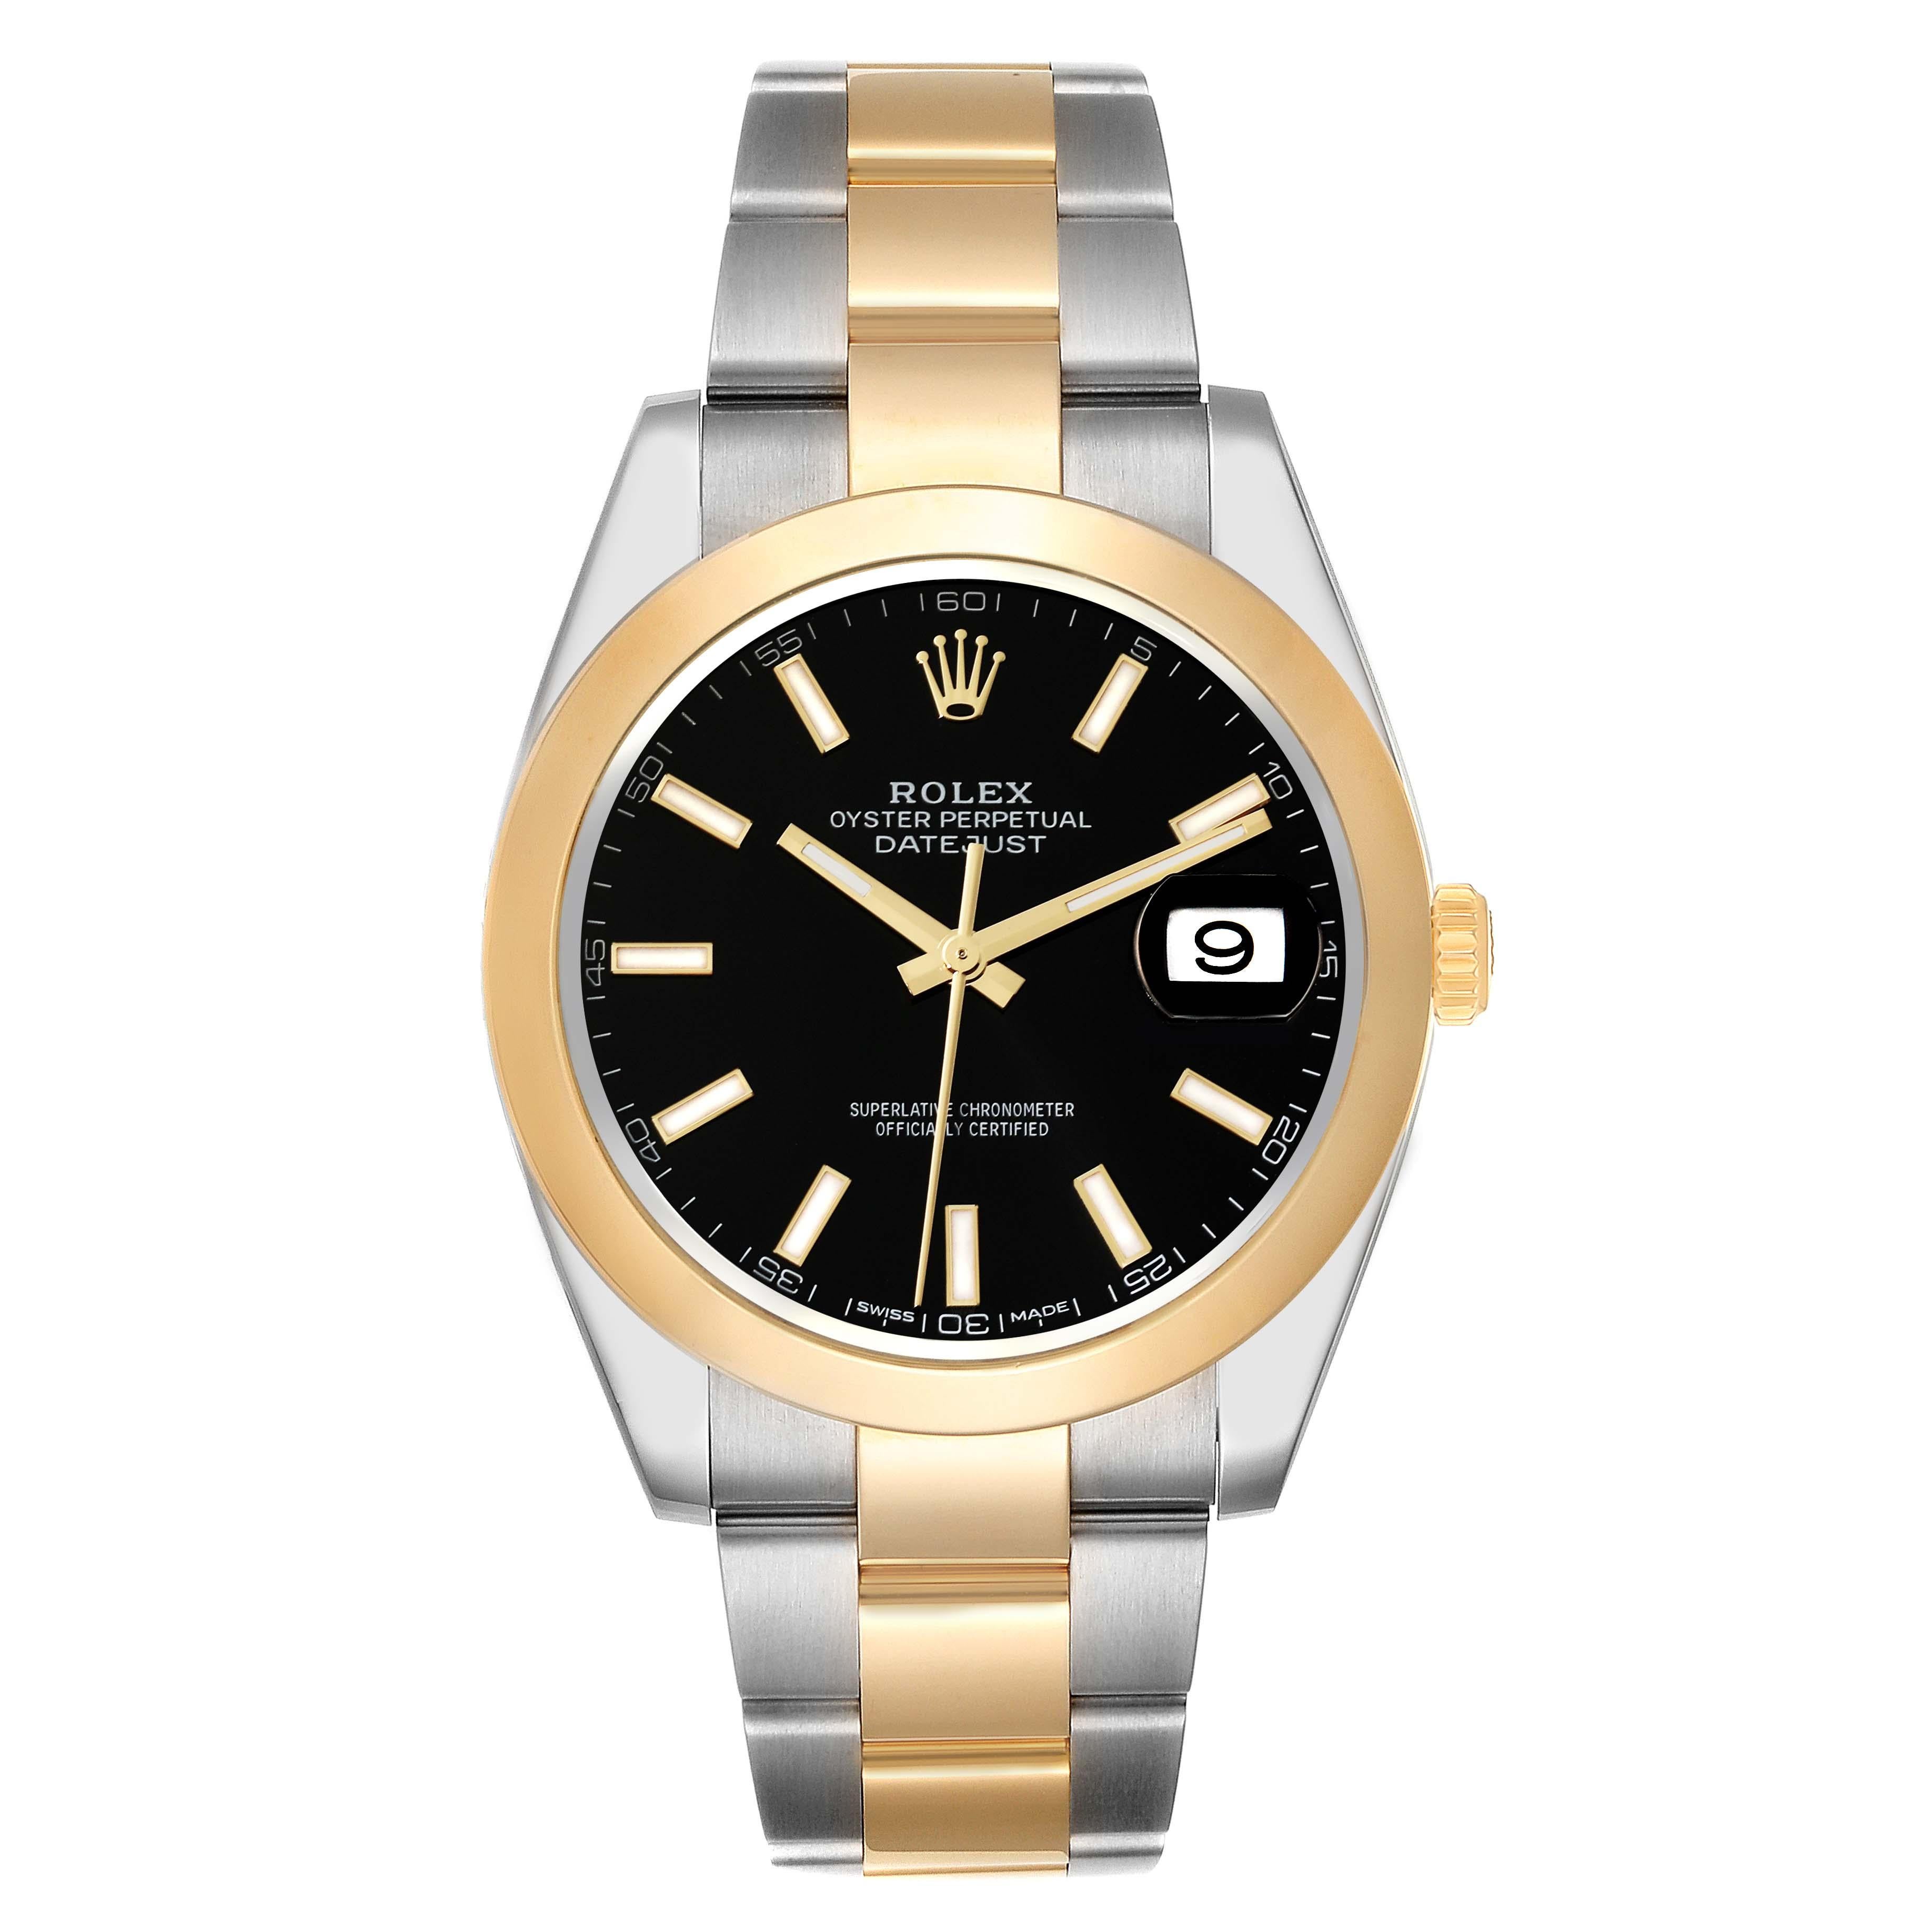 Rolex Datejust 41 Steel Yellow Gold Black Dial Mens Watch 126303 Box Card. Officially certified chronometer self-winding movement. Stainless steel and 18K yellow gold case 41.0 mm in diameter. Rolex logo on a crown. 18K yellow gold smooth domed